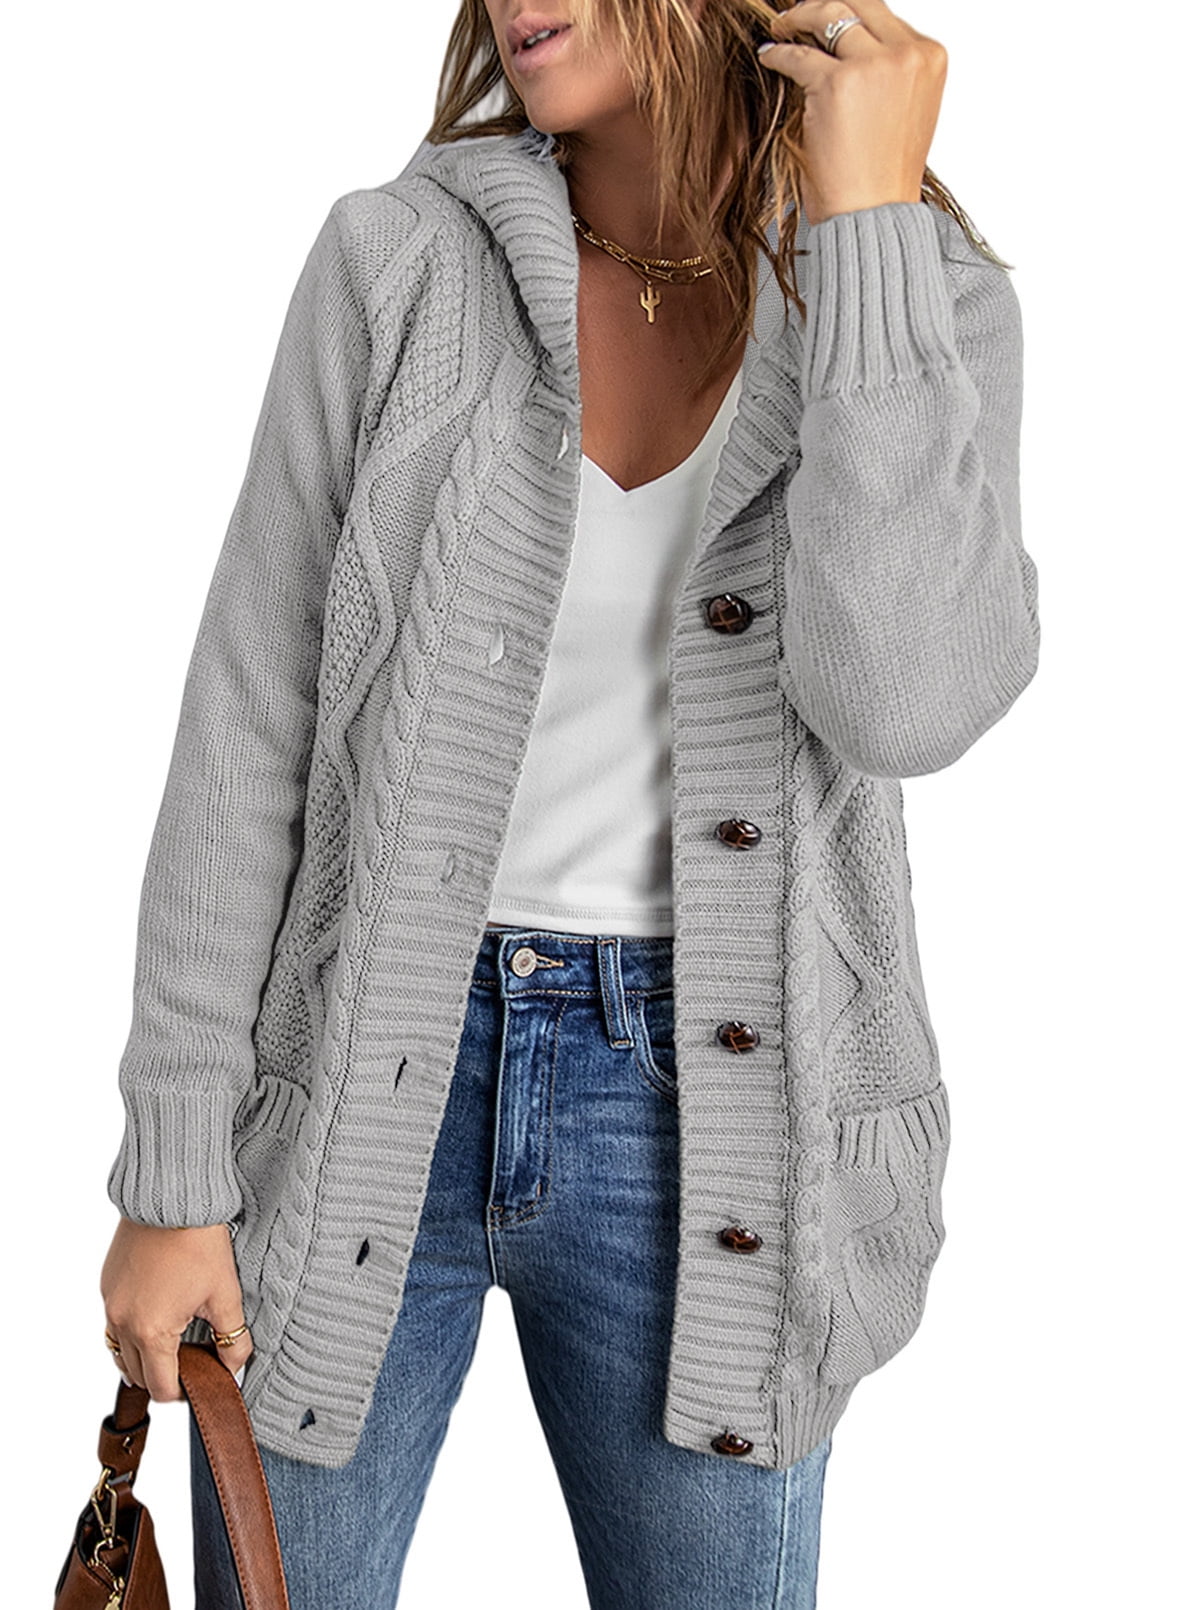 WPNMASNP Womens Fleece Hooded Cardigans Sweater Fall Outfit Free Items  Under 1 Dollar,Bulk Bookbags,Prime Deals Of The Day Deals,Cheap Items Under  1,Holiday Sales,Stuff For 3 Dollars Gray at  Women's Coats Shop